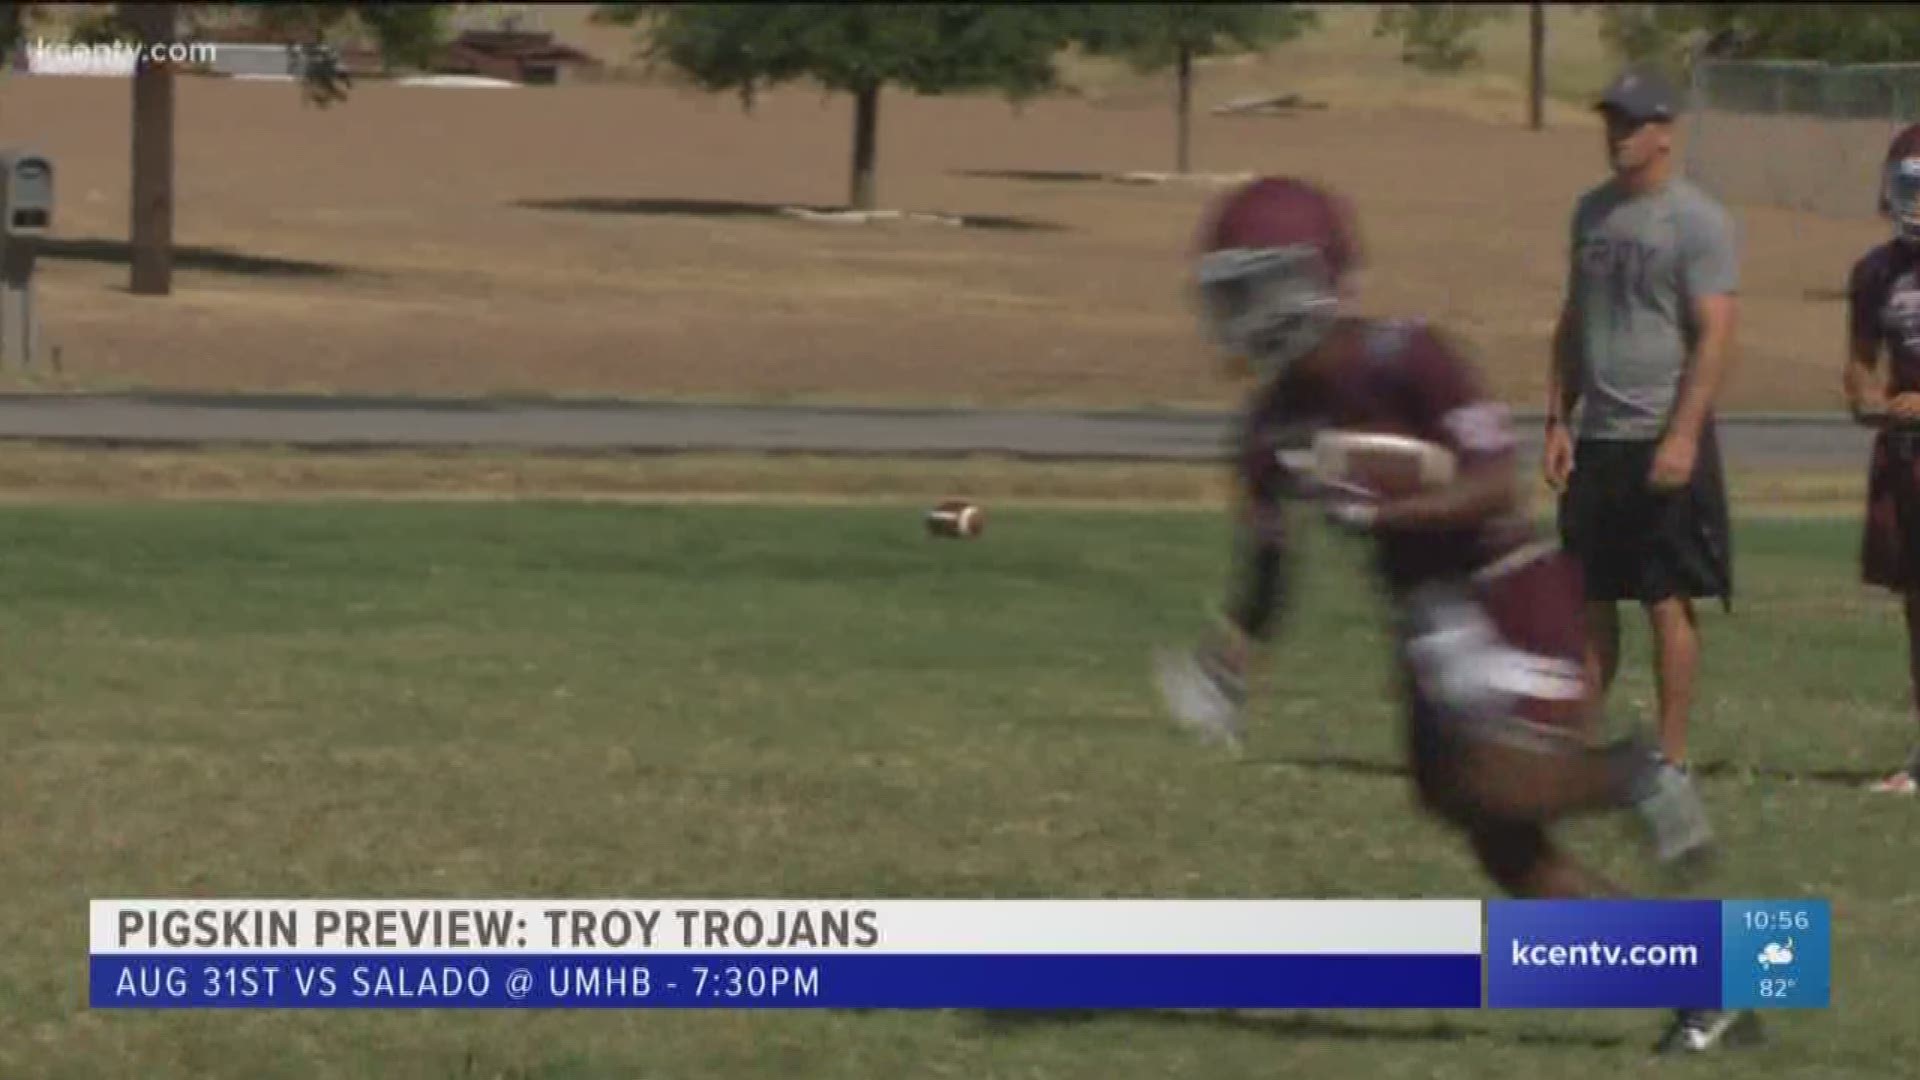 The Trojans look to bounce back after a disappointing 3-7 season.